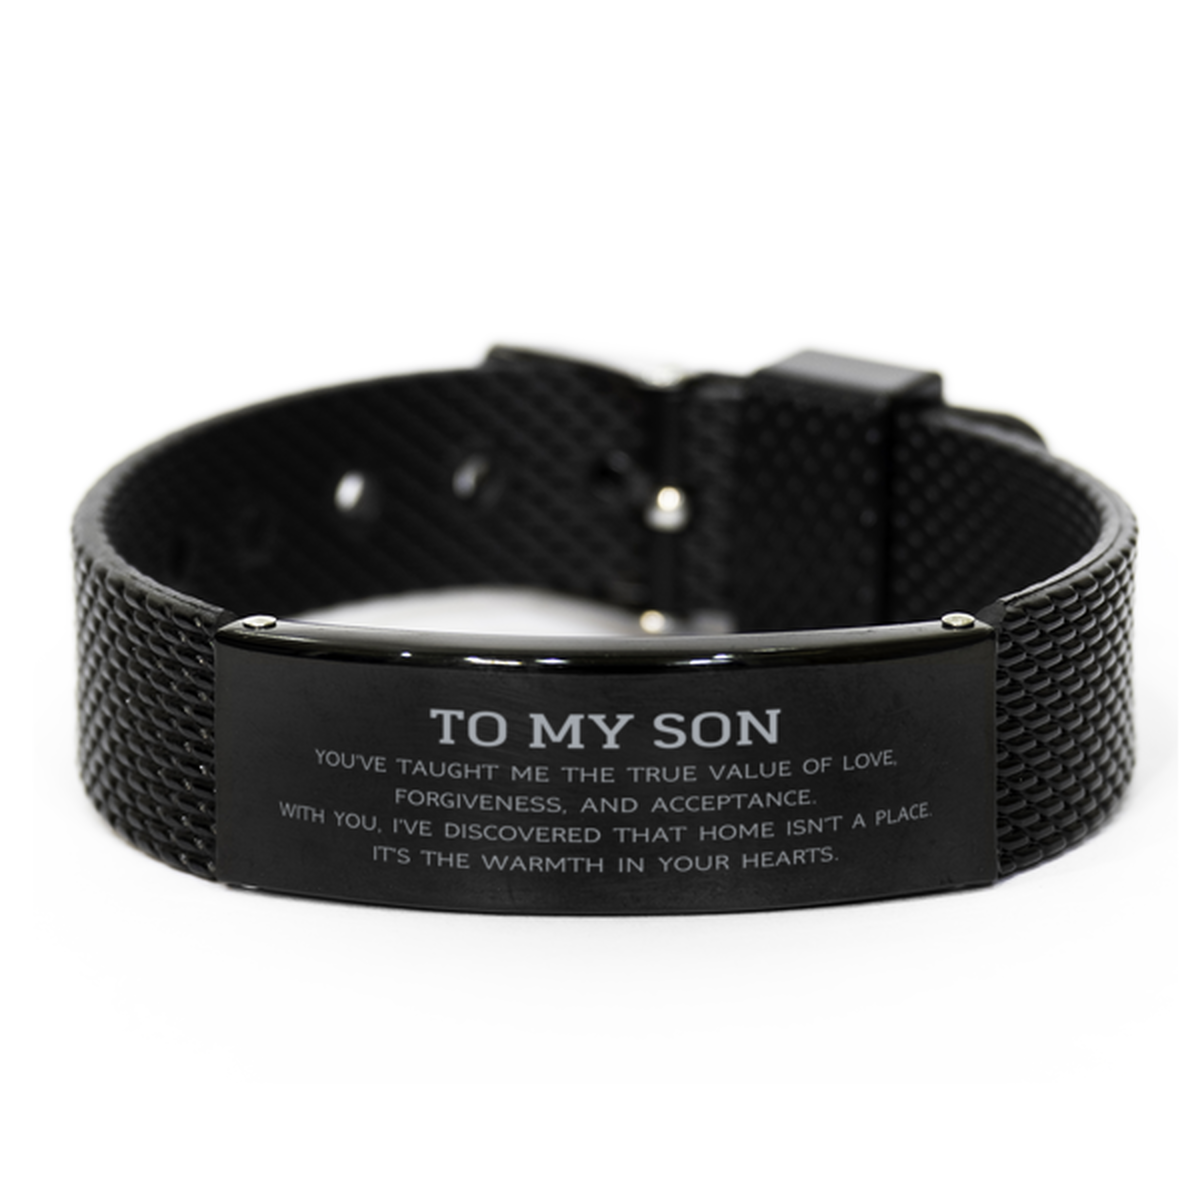 To My Son Gifts, You've taught me the true value of love, Thank You Gifts For Son, Birthday Black Shark Mesh Bracelet For Son